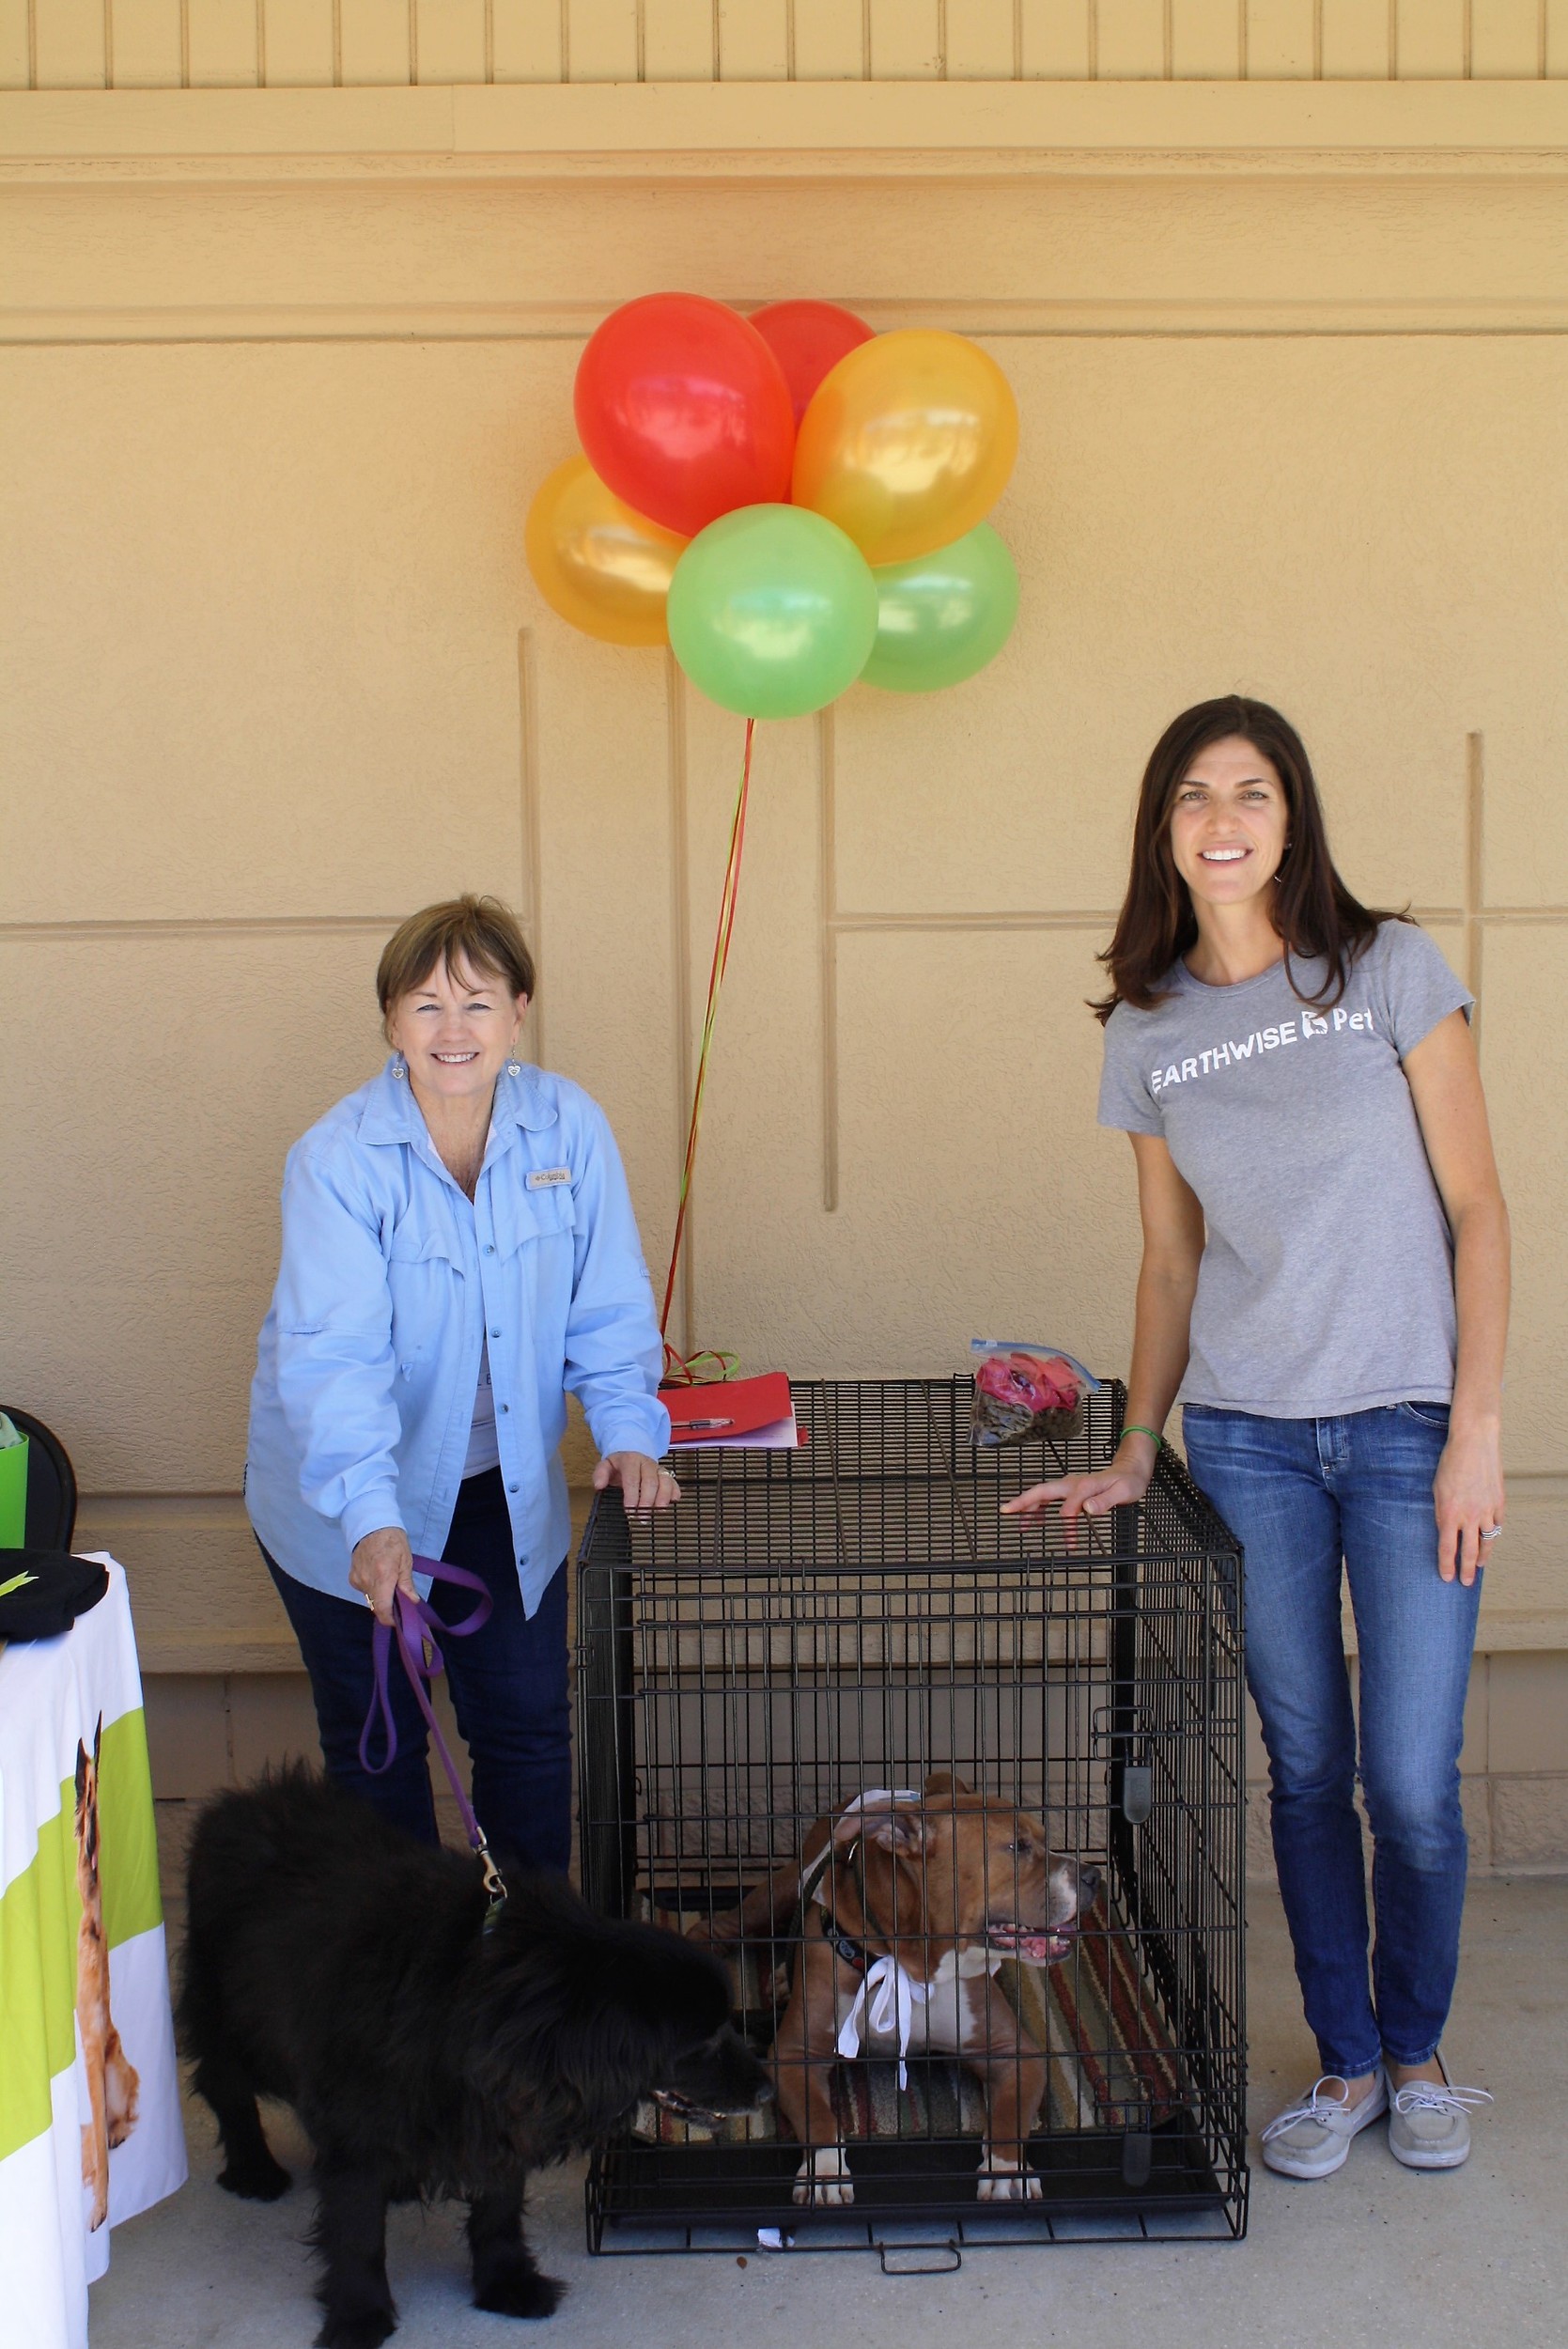 Carolyn Edwards (left) of Friends of Jacksonville Animals joins EarthWise Pet Supply owner Valerie Costello at the Jacksonville Beach store's grand opening celebration. The event featured booths by a number of local animal shelters, which brought along pets available for adoption. The Store also awarded a year's supply of free pet food and other prizes throughout the day.